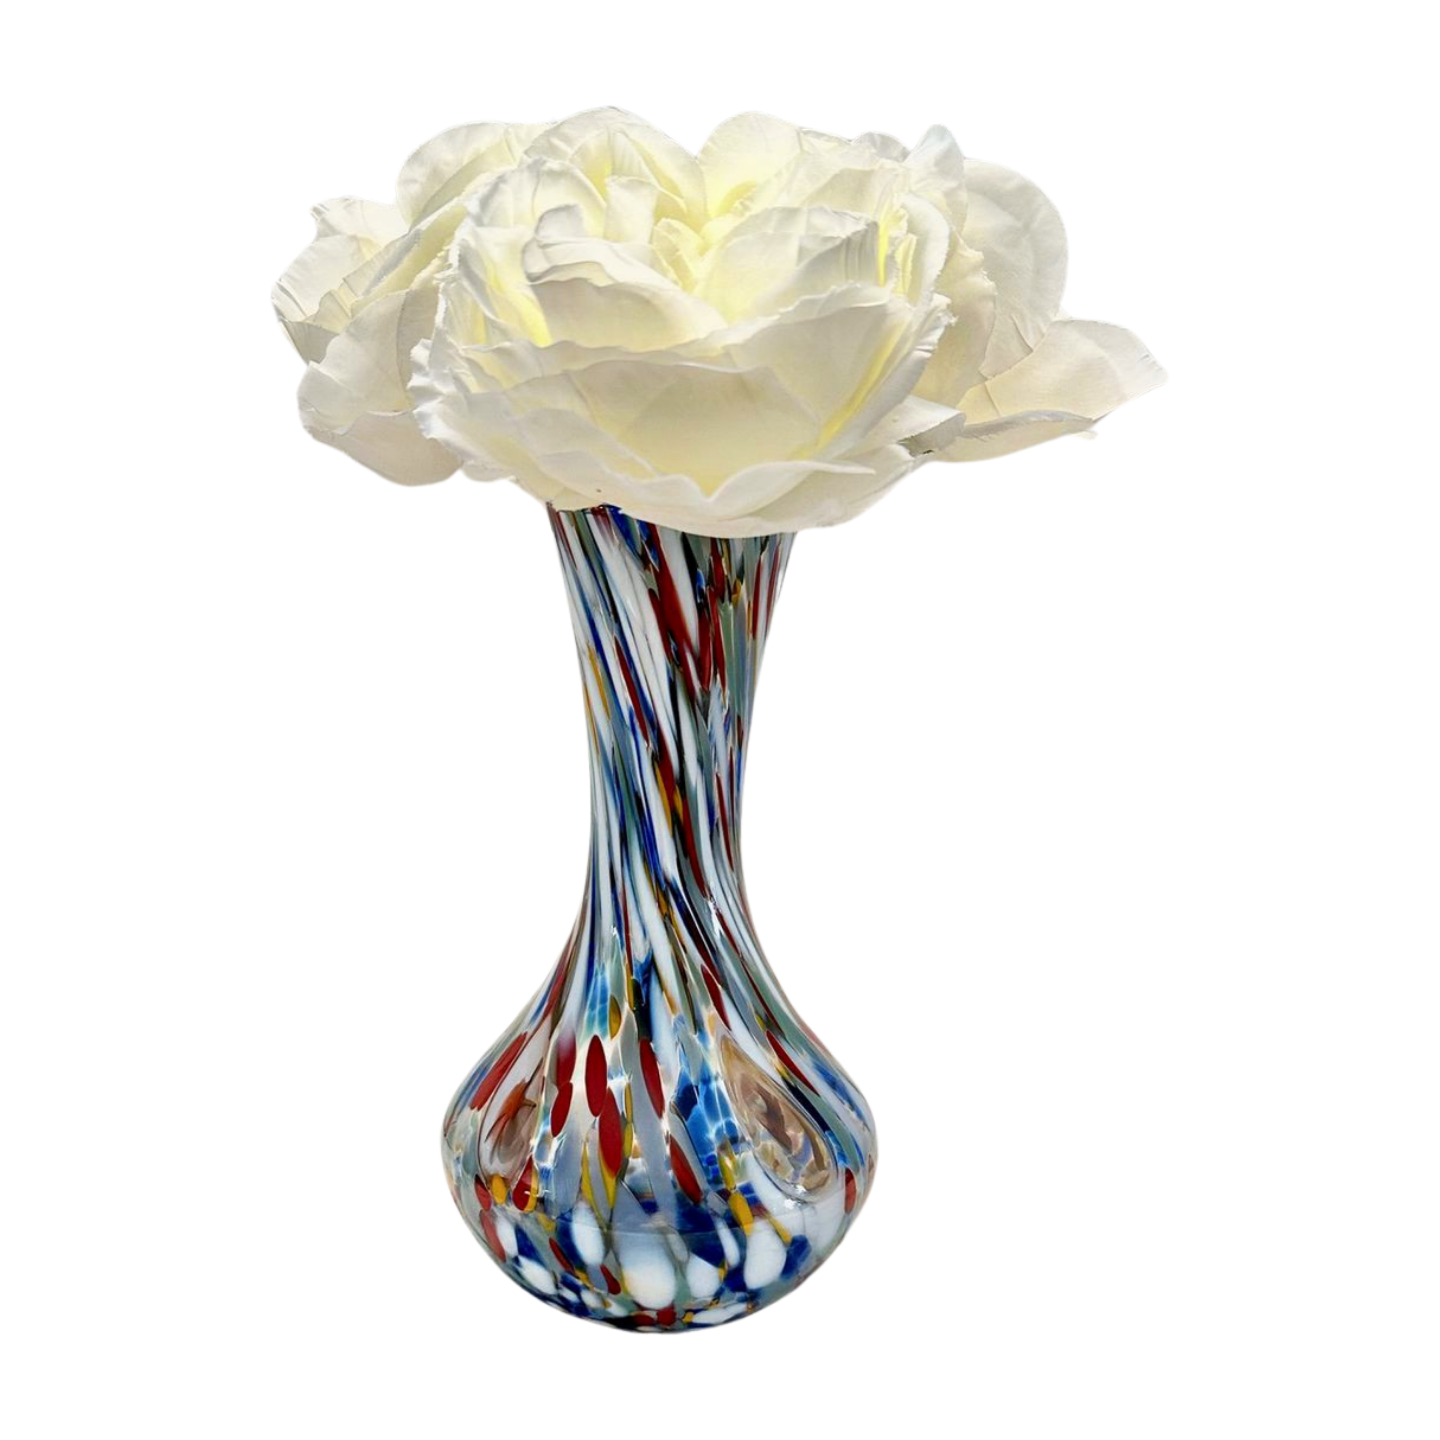 Murano Glass Vase in multicolor design. Shown here with flowers for size. Hand-blown in Italy.